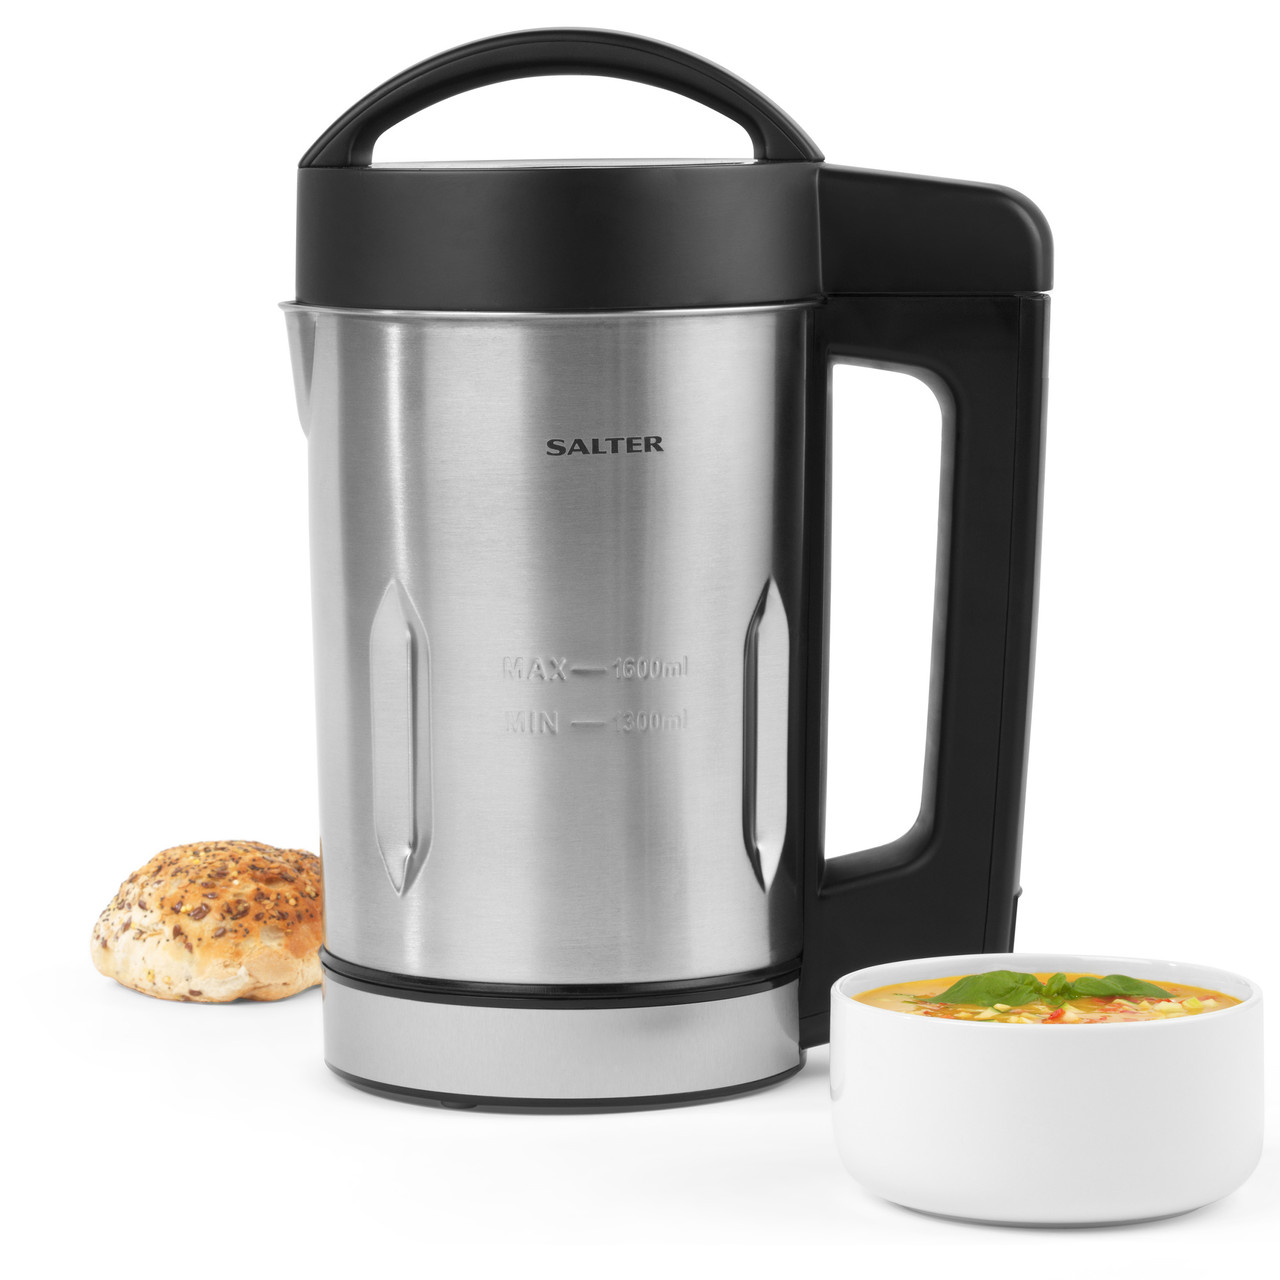 Digital Soup Maker, 1.6 Litre Capacity, 5 In-Built Settings, Includes Stainless Steel Jug, 900W